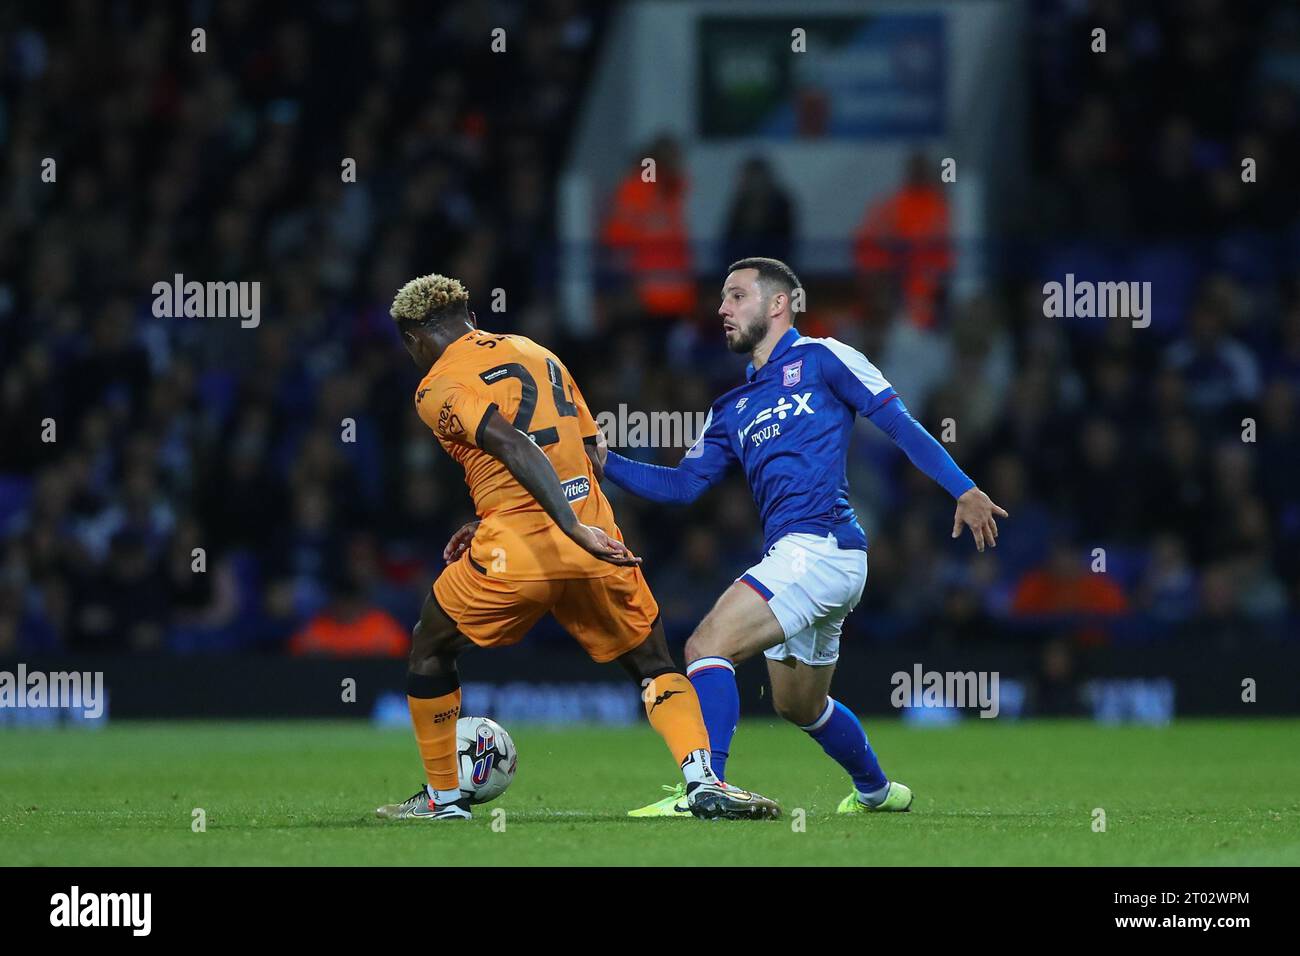 Jean Michaël Seri #24 of Hull City tackles Conor Chaplin #10 of Ipswich Town during the Sky Bet Championship match Ipswich Town vs Hull City at Portman Road, Ipswich, United Kingdom, 3rd October 2023  (Photo by Gareth Evans/News Images) Stock Photo